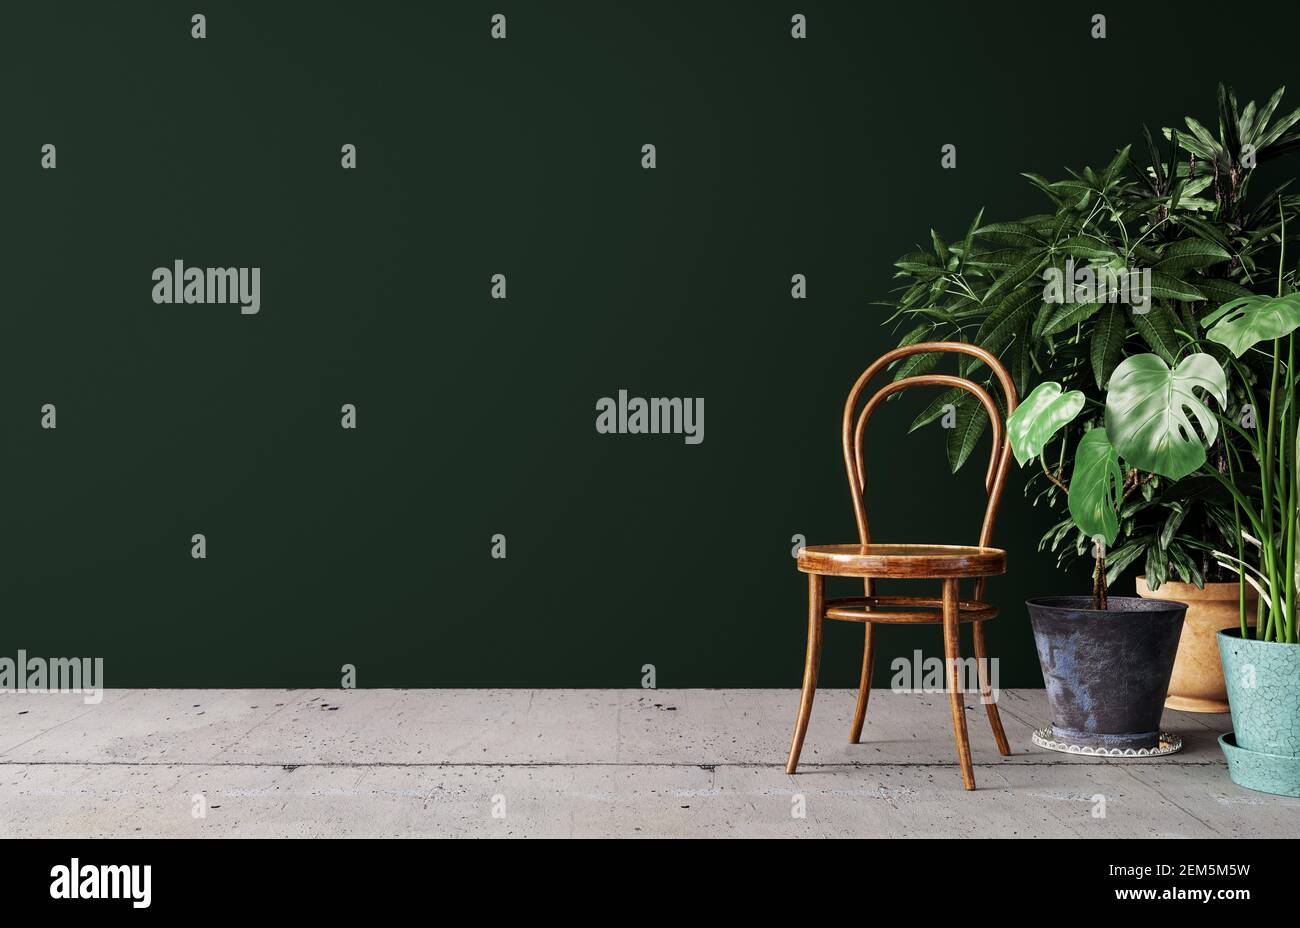 Mock up interior with potted plants and old wooden chair in front of dark green wall background 3D Rendering, 3D Illustration Stock Photo